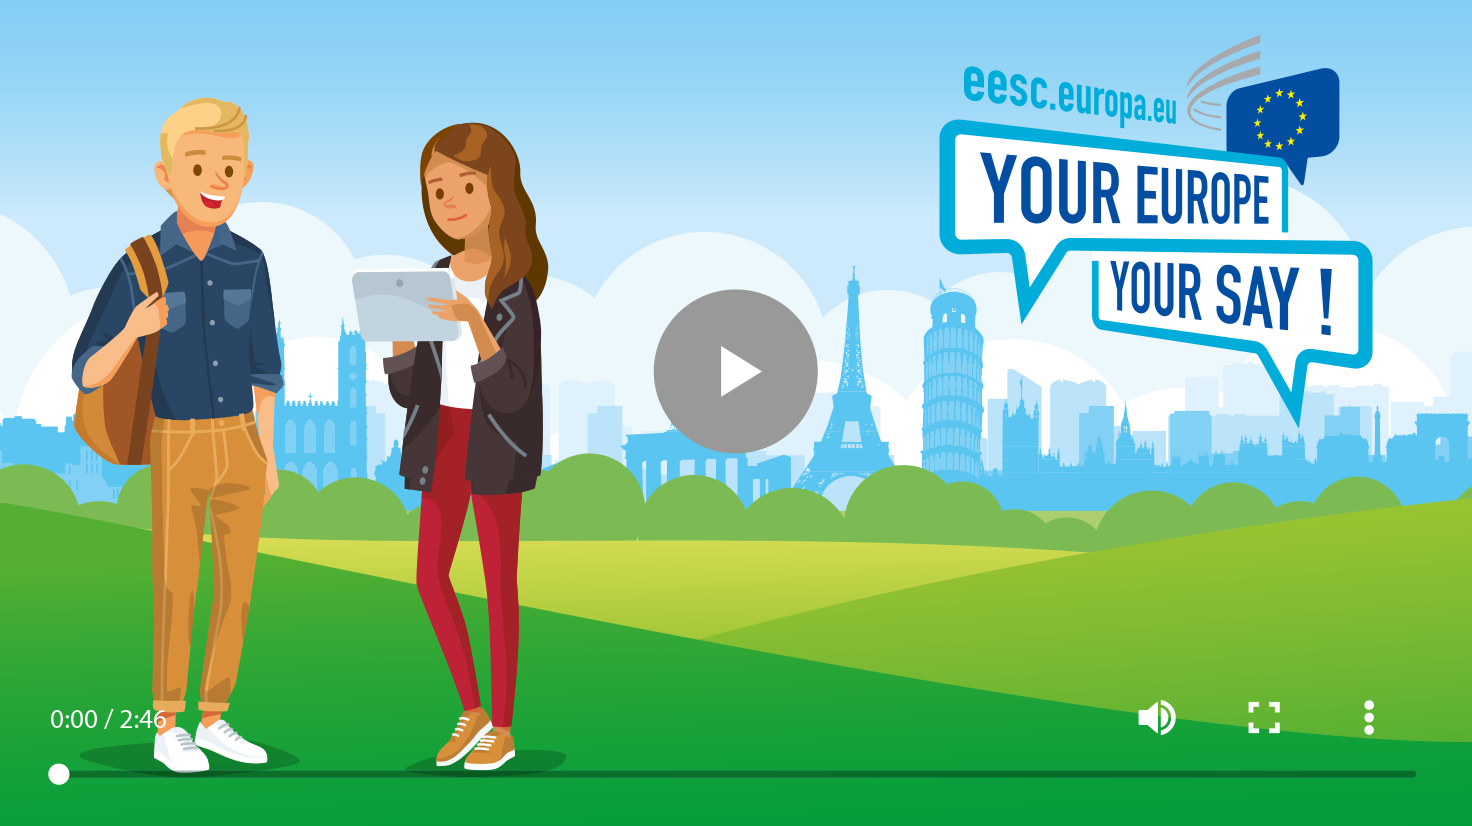 This animated video clip presents Your Europe Your Say, the annual event of the European Economic and Social Committee for young people. It explains how it works and how to participate.